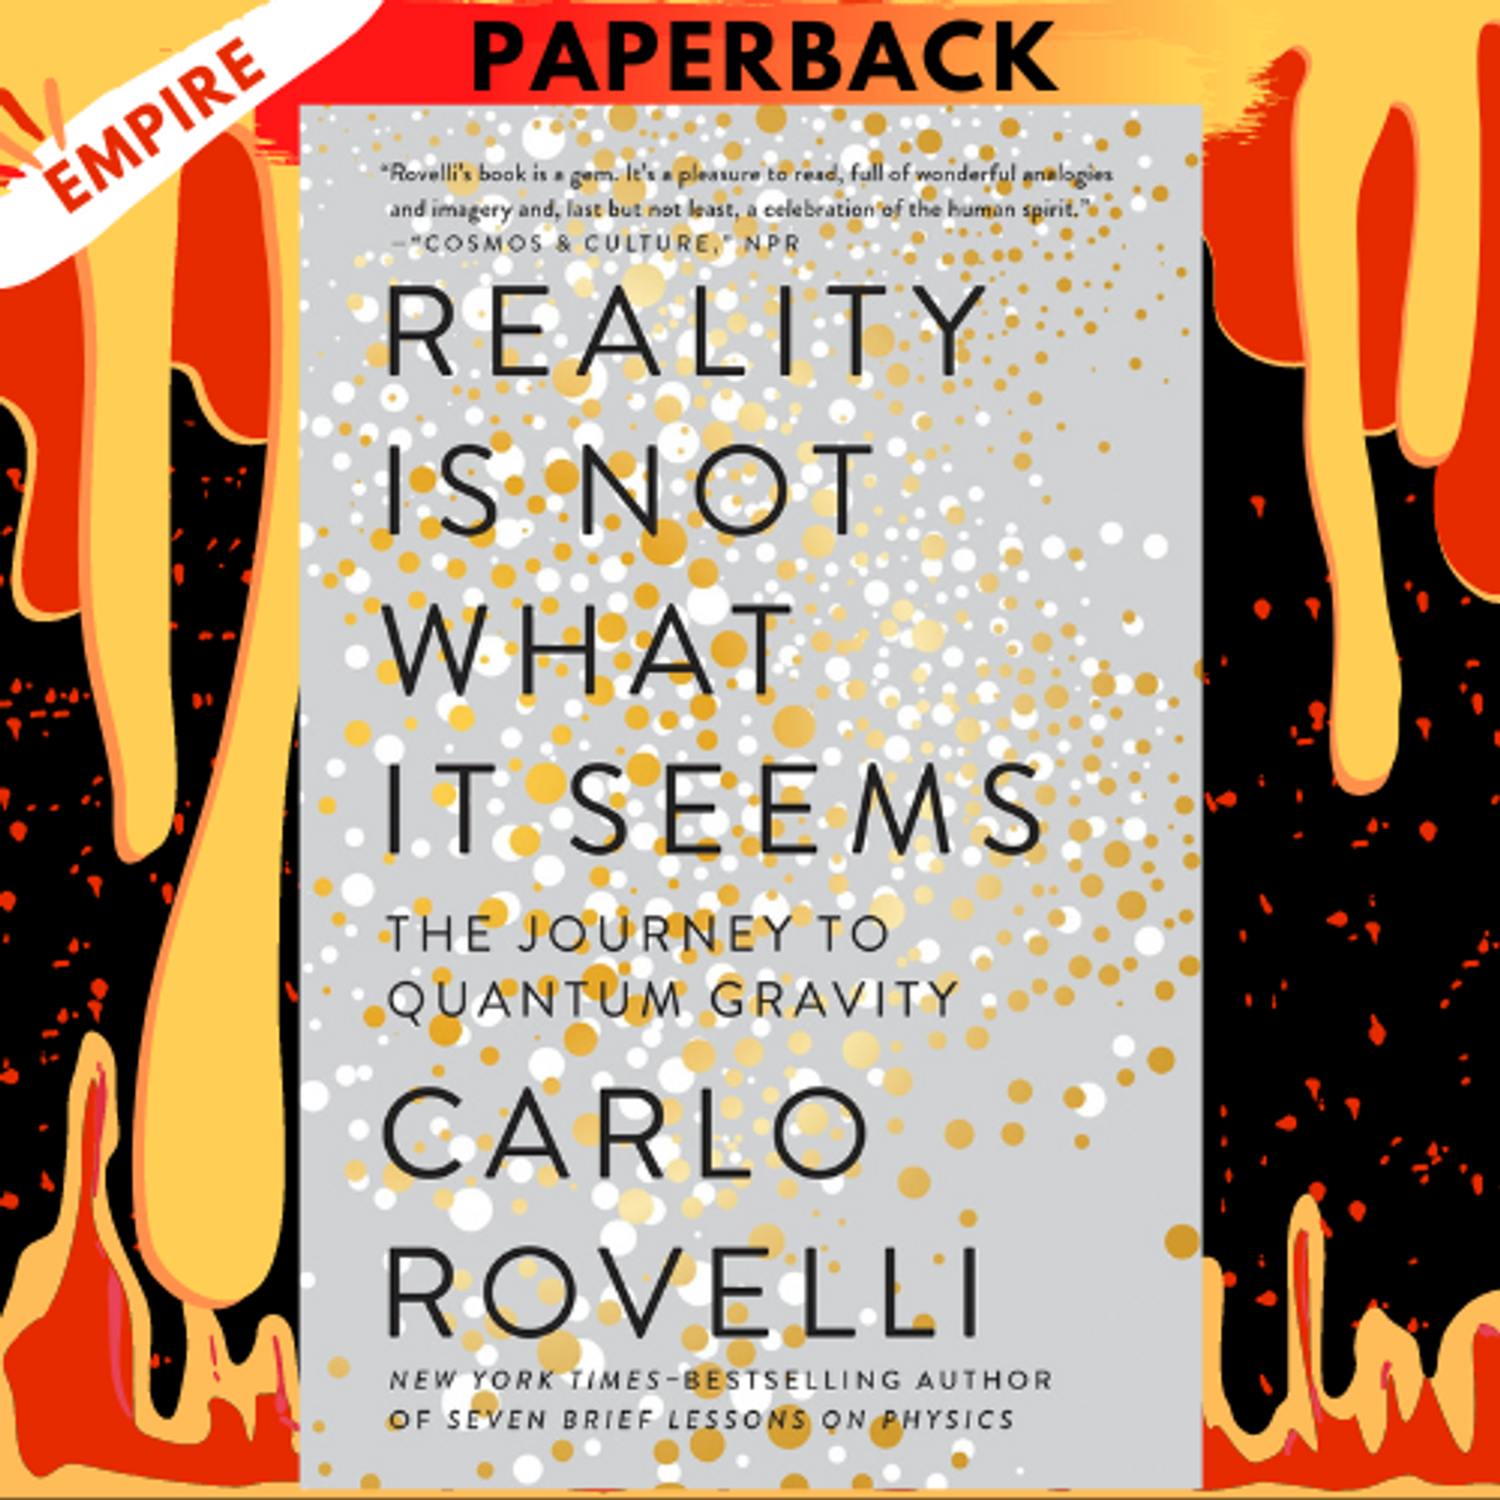 Sunday Book: Carlo Rovelli - Reality Is Not What It Seems